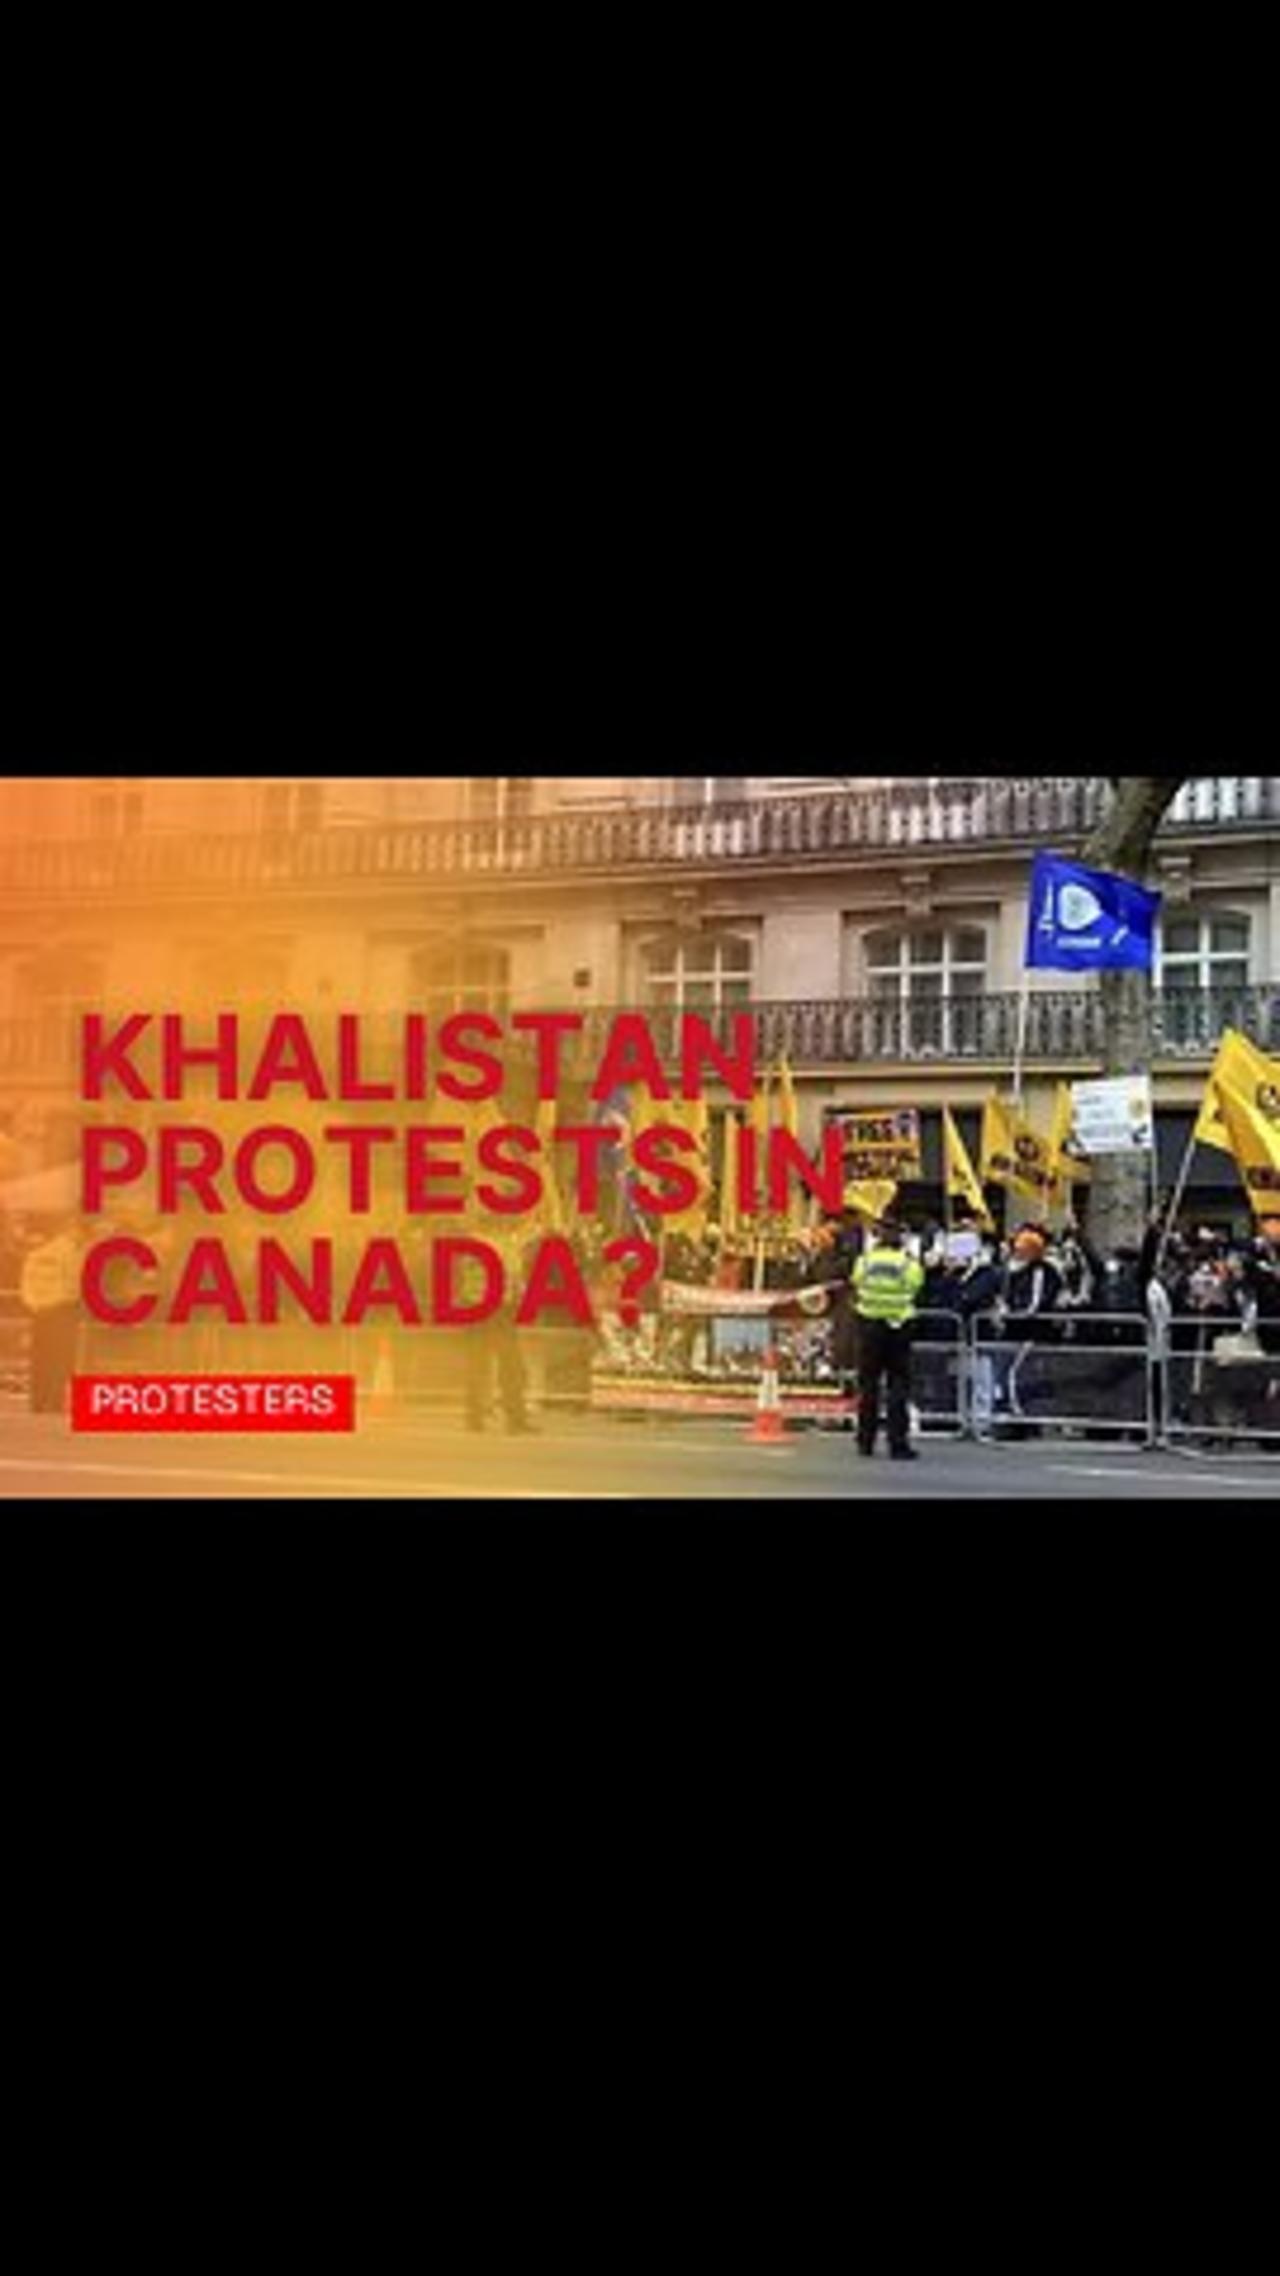 Why Do We Have Khalistan Protests In Canada?